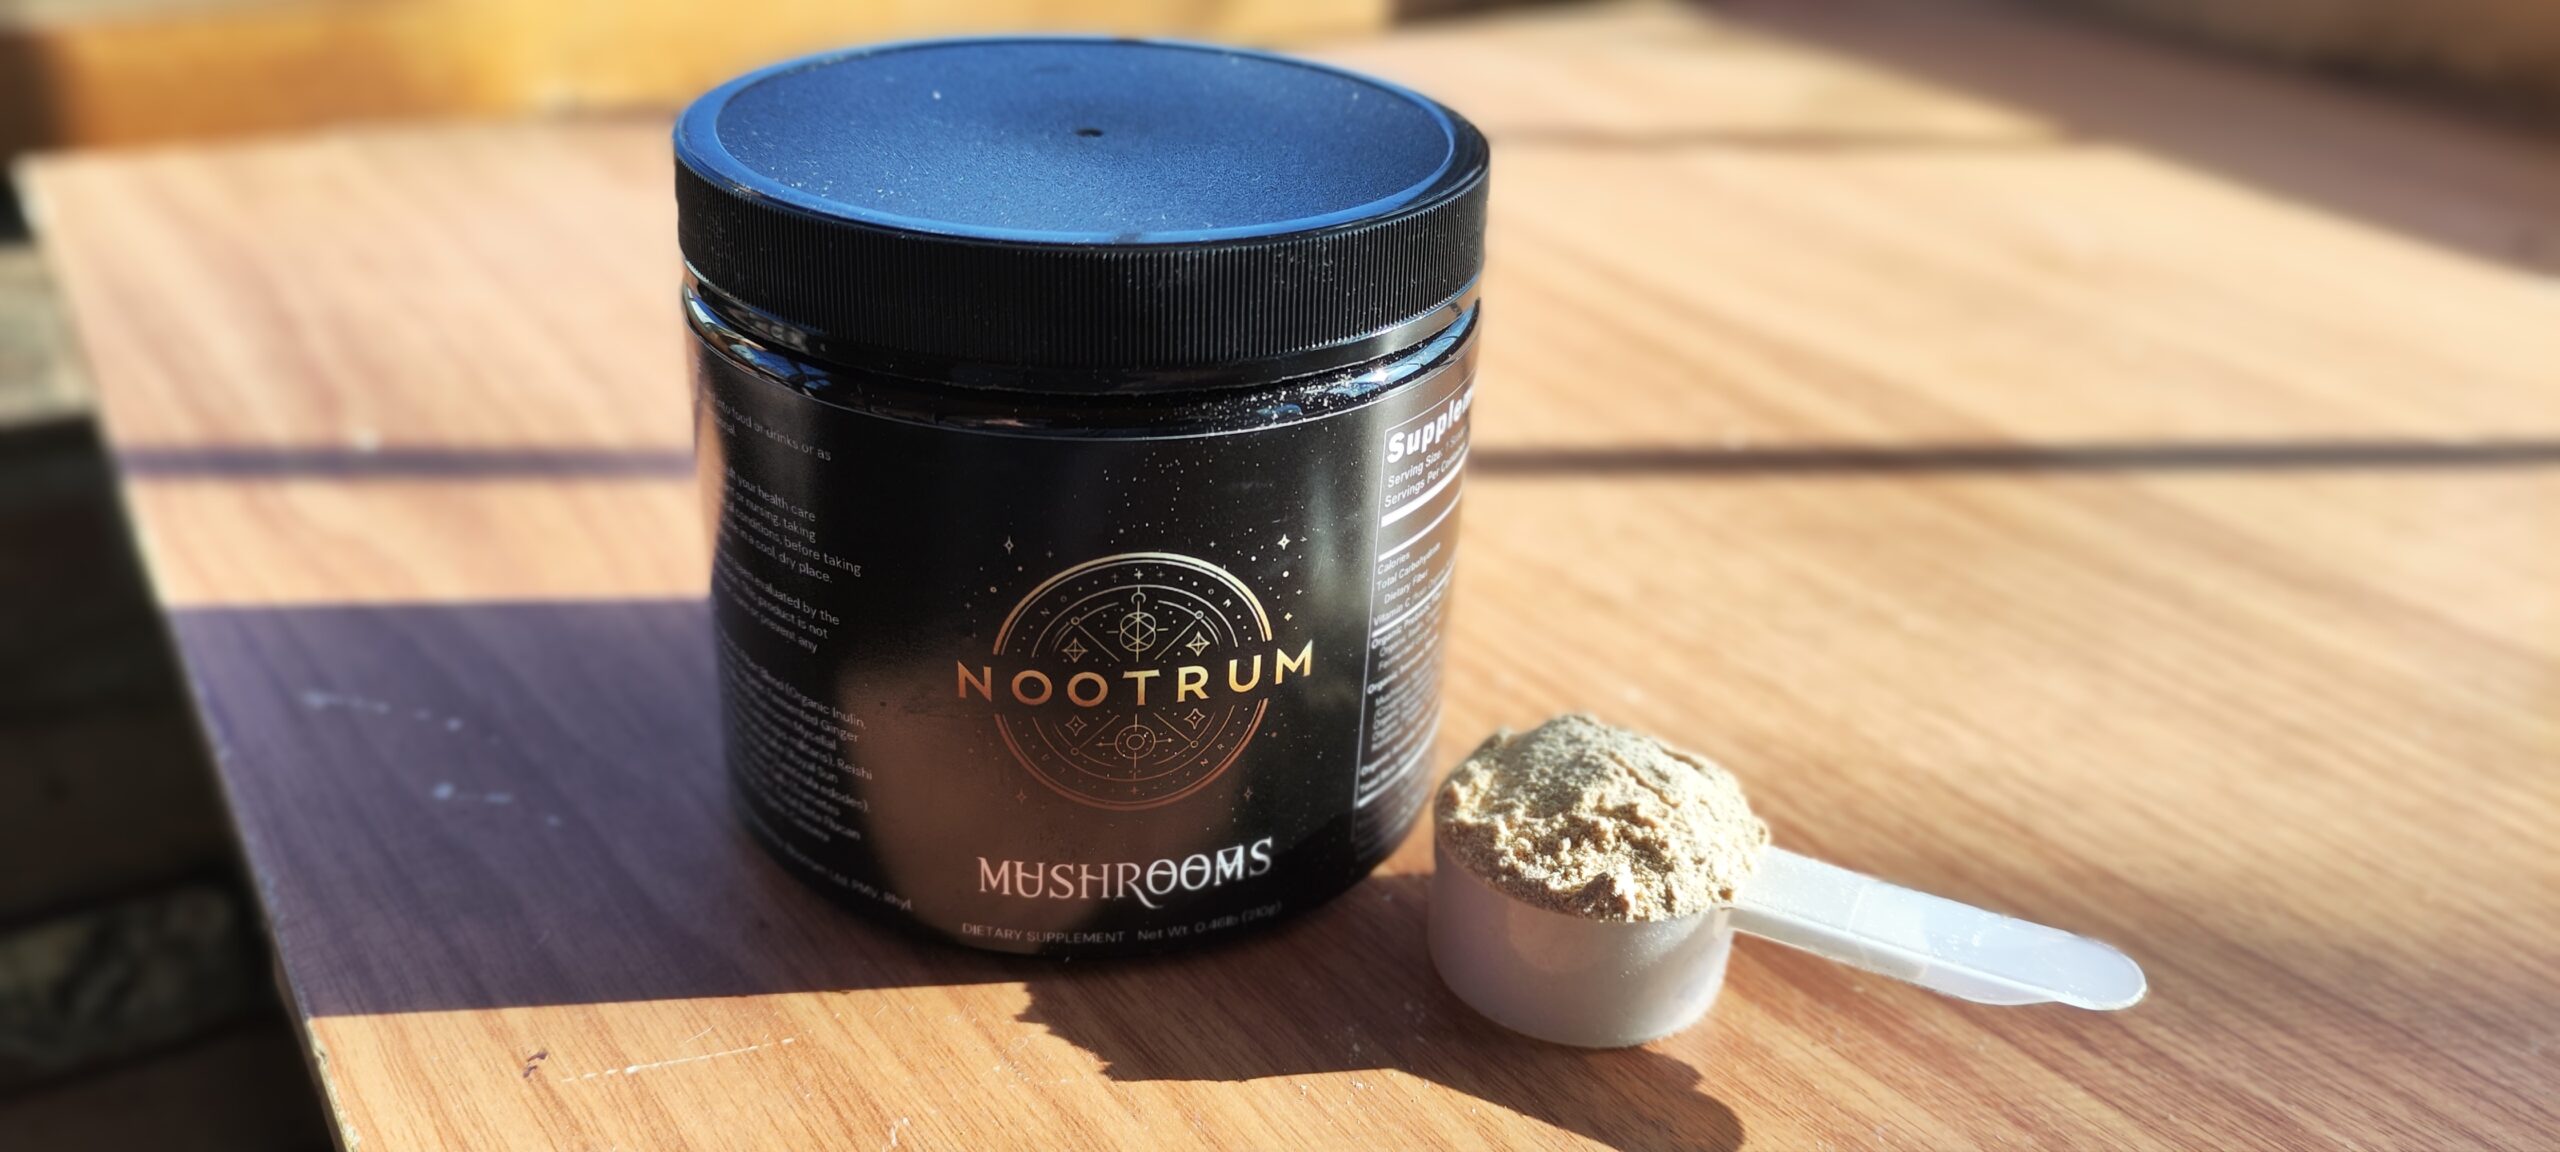 Nootrum Review by Johnny at latestfuels